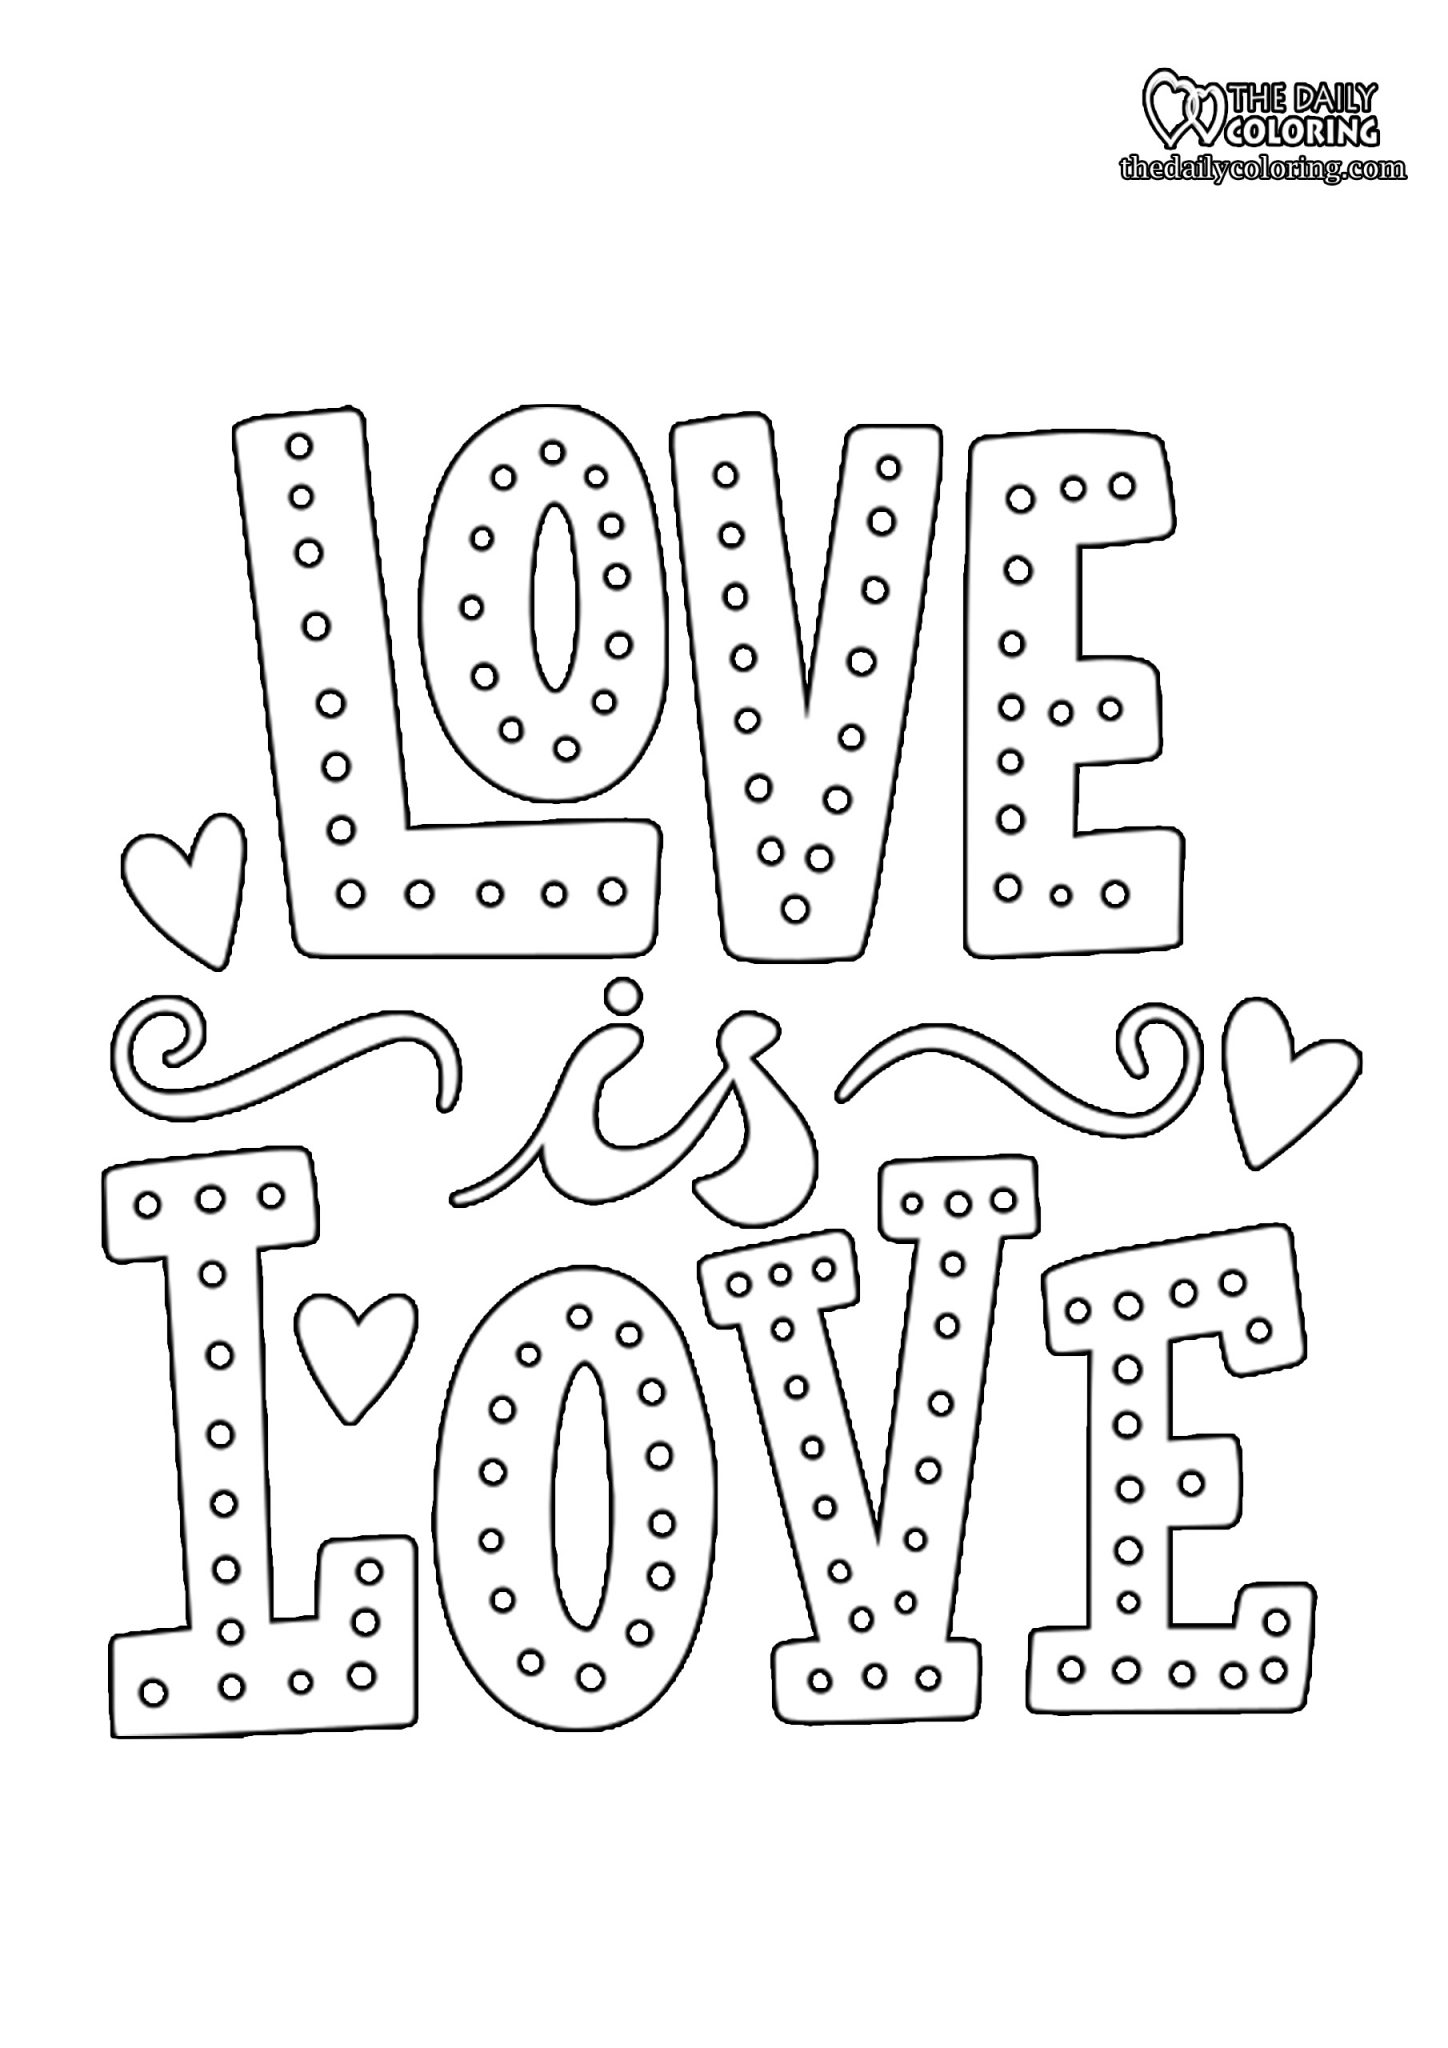 Motivation Of Love Coloring Pages - The Daily Coloring